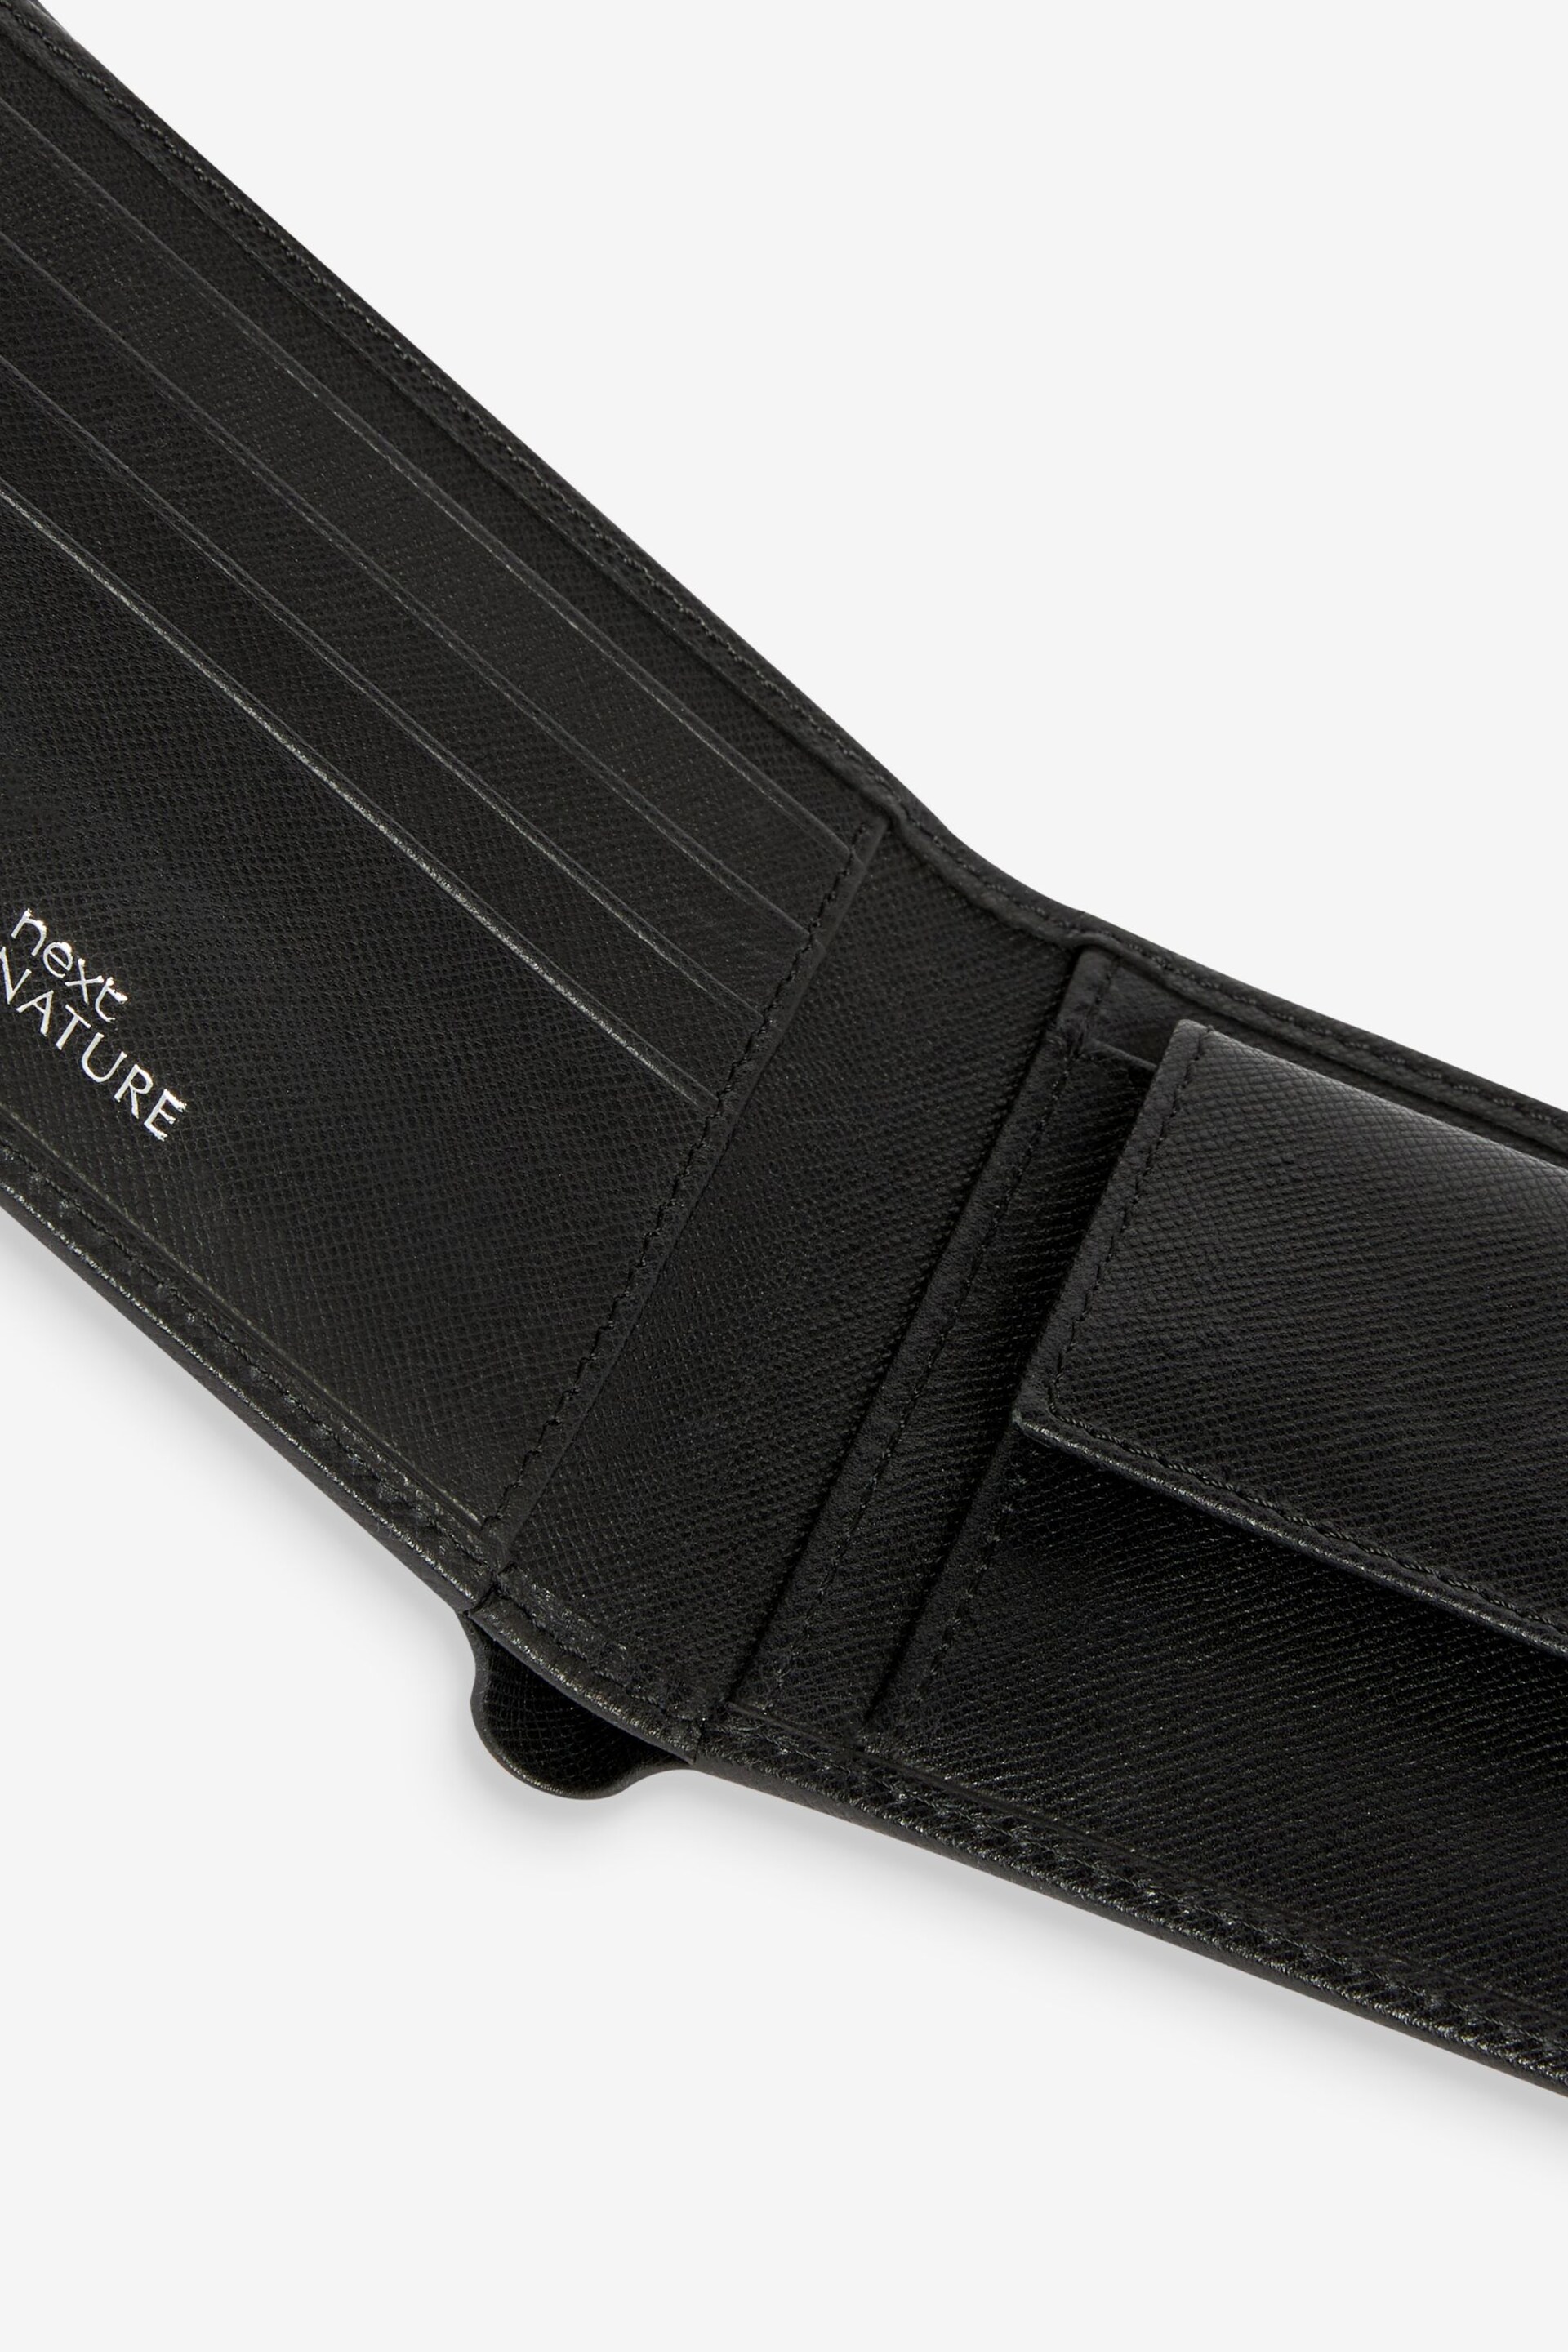 Black Signature Saffiano Leather Wallet - Image 3 of 3